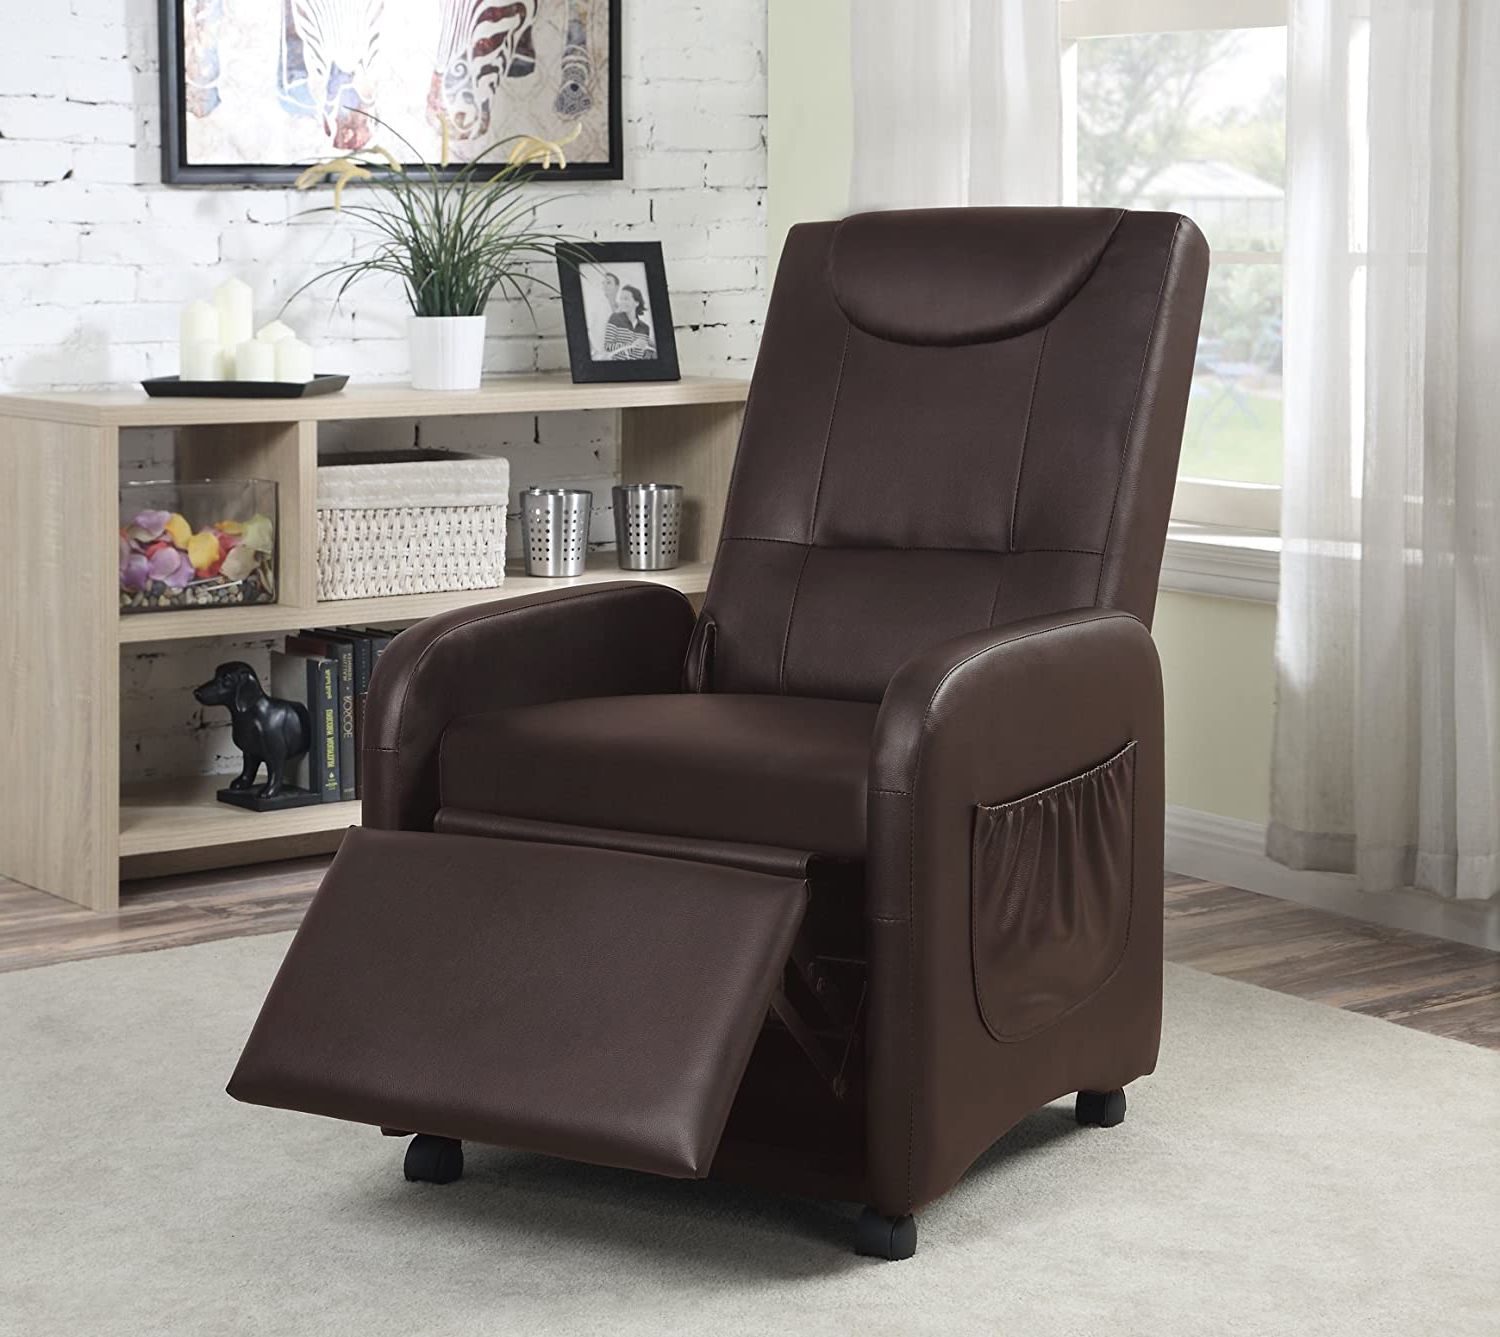 Viscologic Folding Gaming Faux Leather Manual Reclining Living Room Pertaining To 2019 Medium Brown Leather Folding Stools (View 7 of 10)